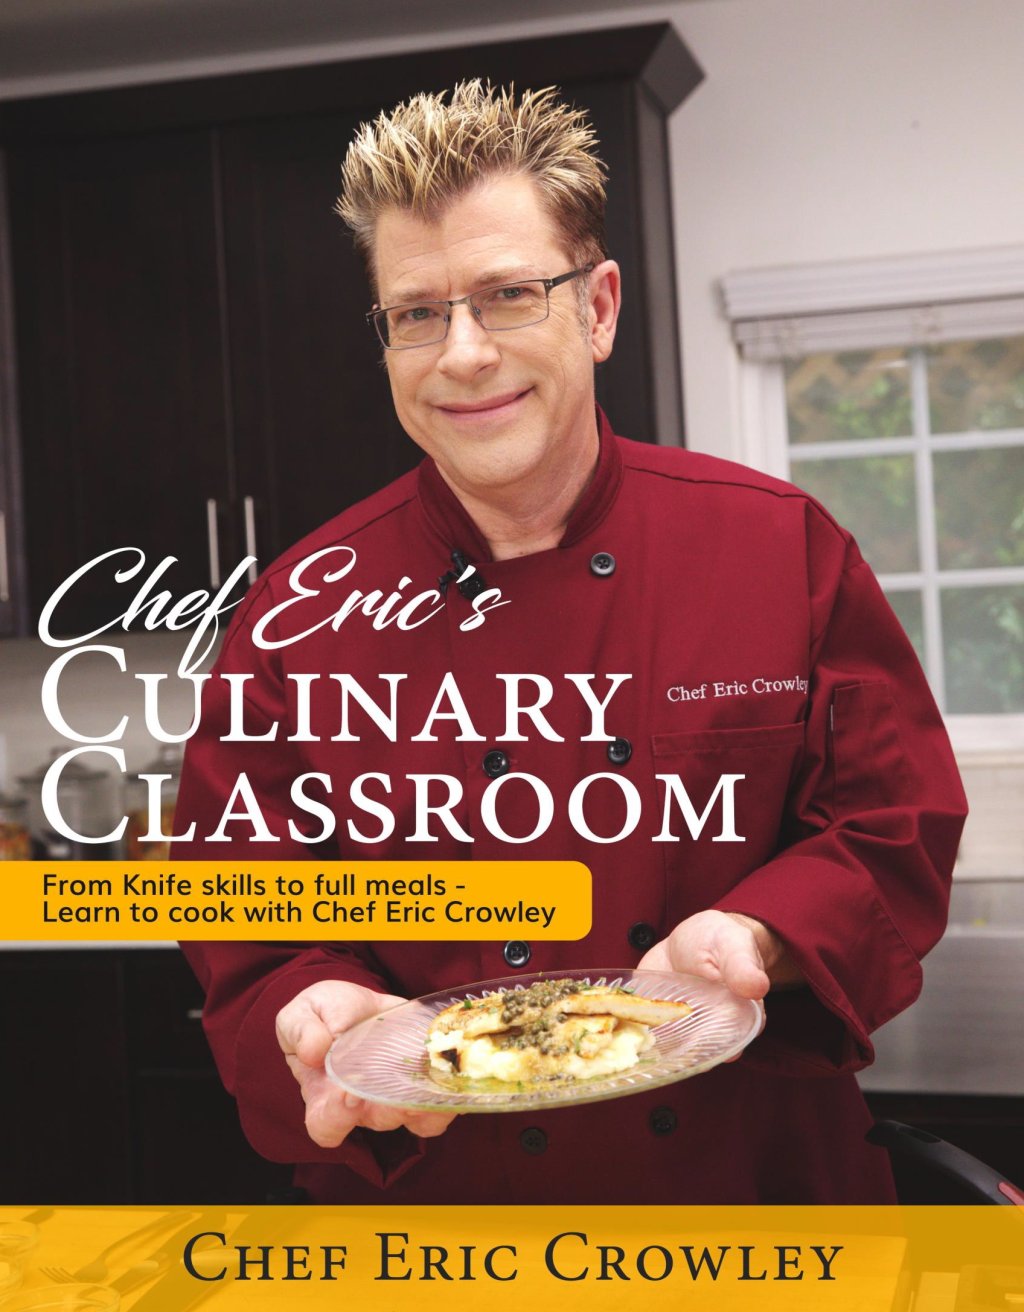 Master Chef Cooking Video Program | Chef Eric's Culinary Classroom | Image #5/7 | 